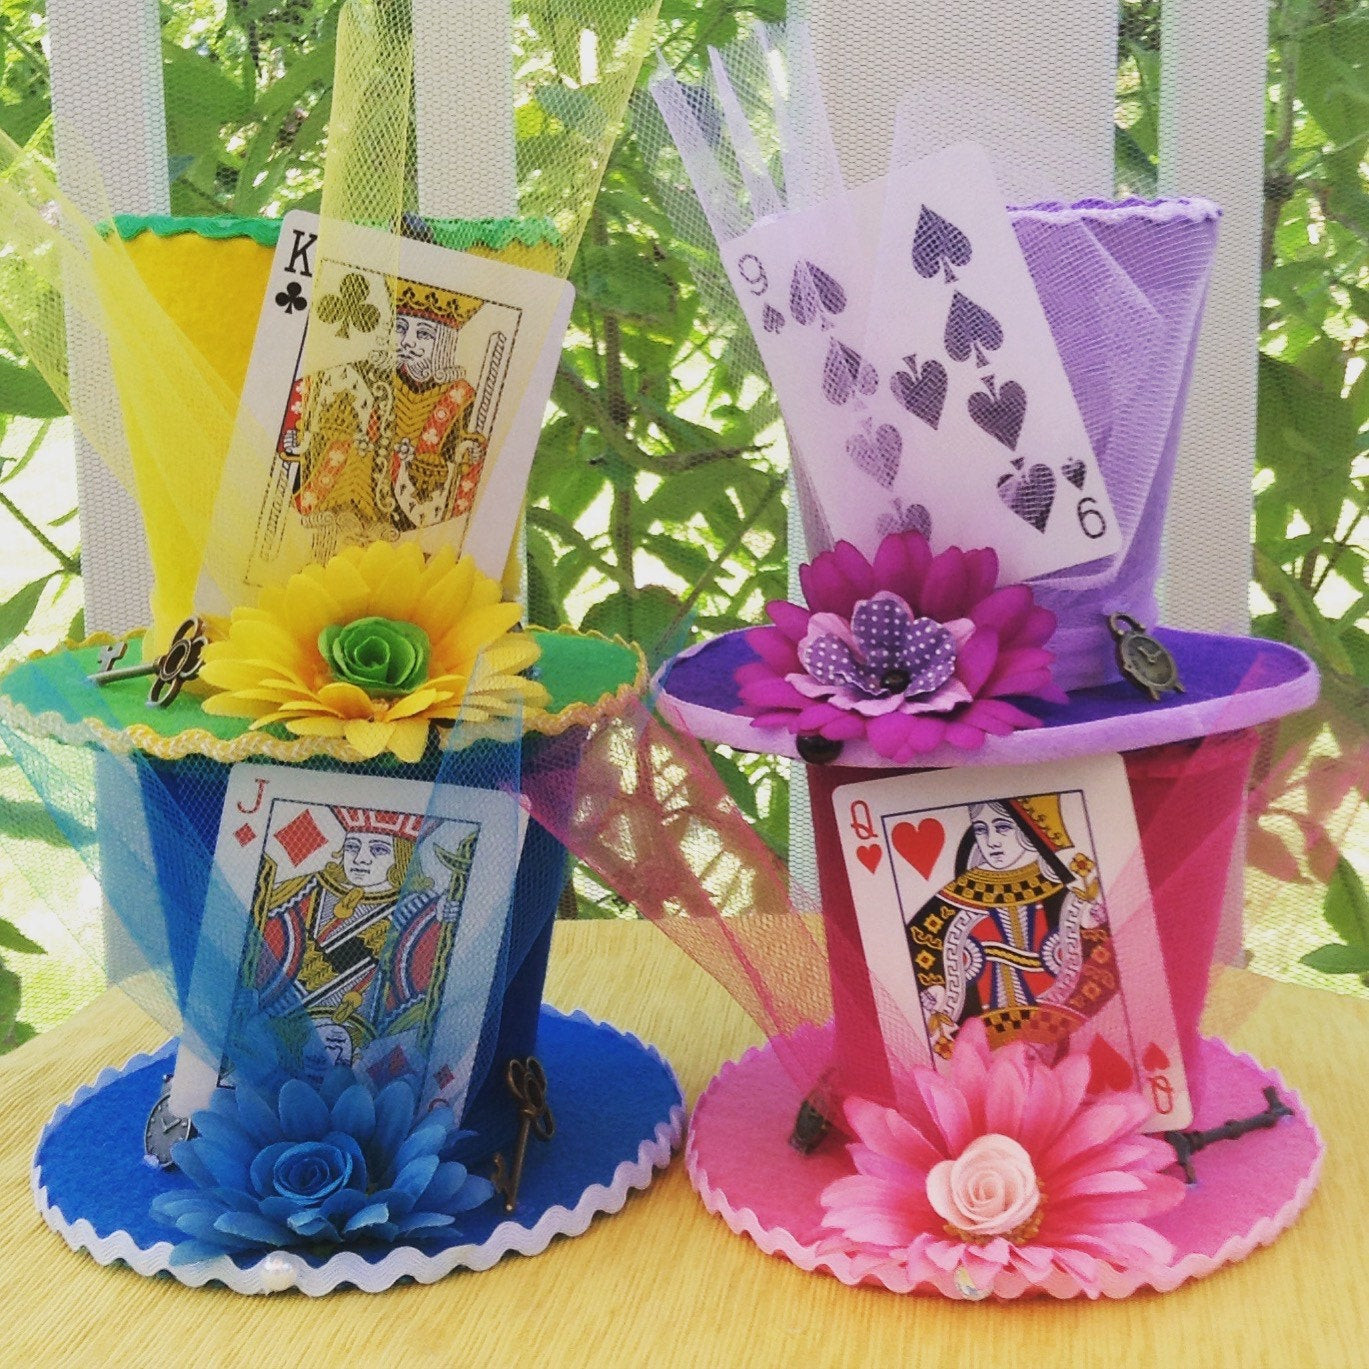 Mad Hatter Birthday Party
 Mad Hatter Tea Party Decorations Set of 4 Alice in